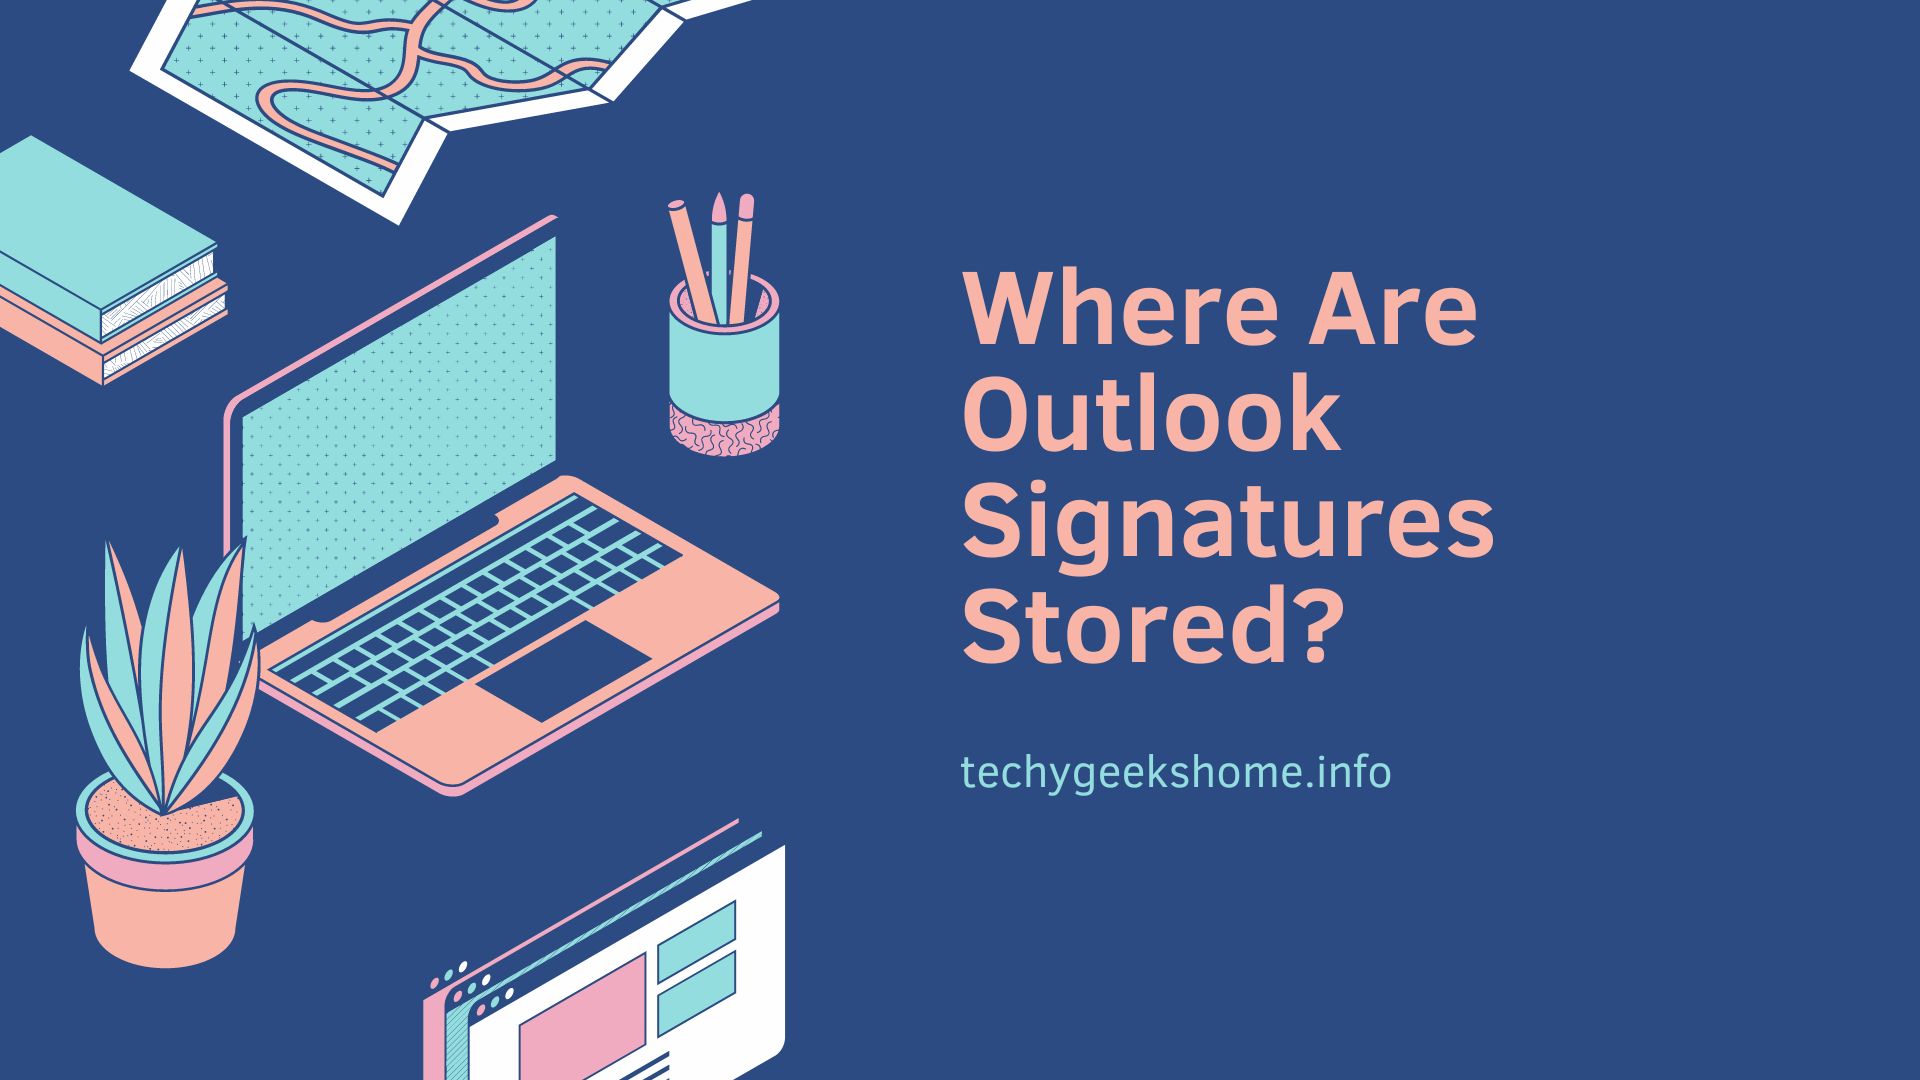 Where Are Outlook Signatures Stored